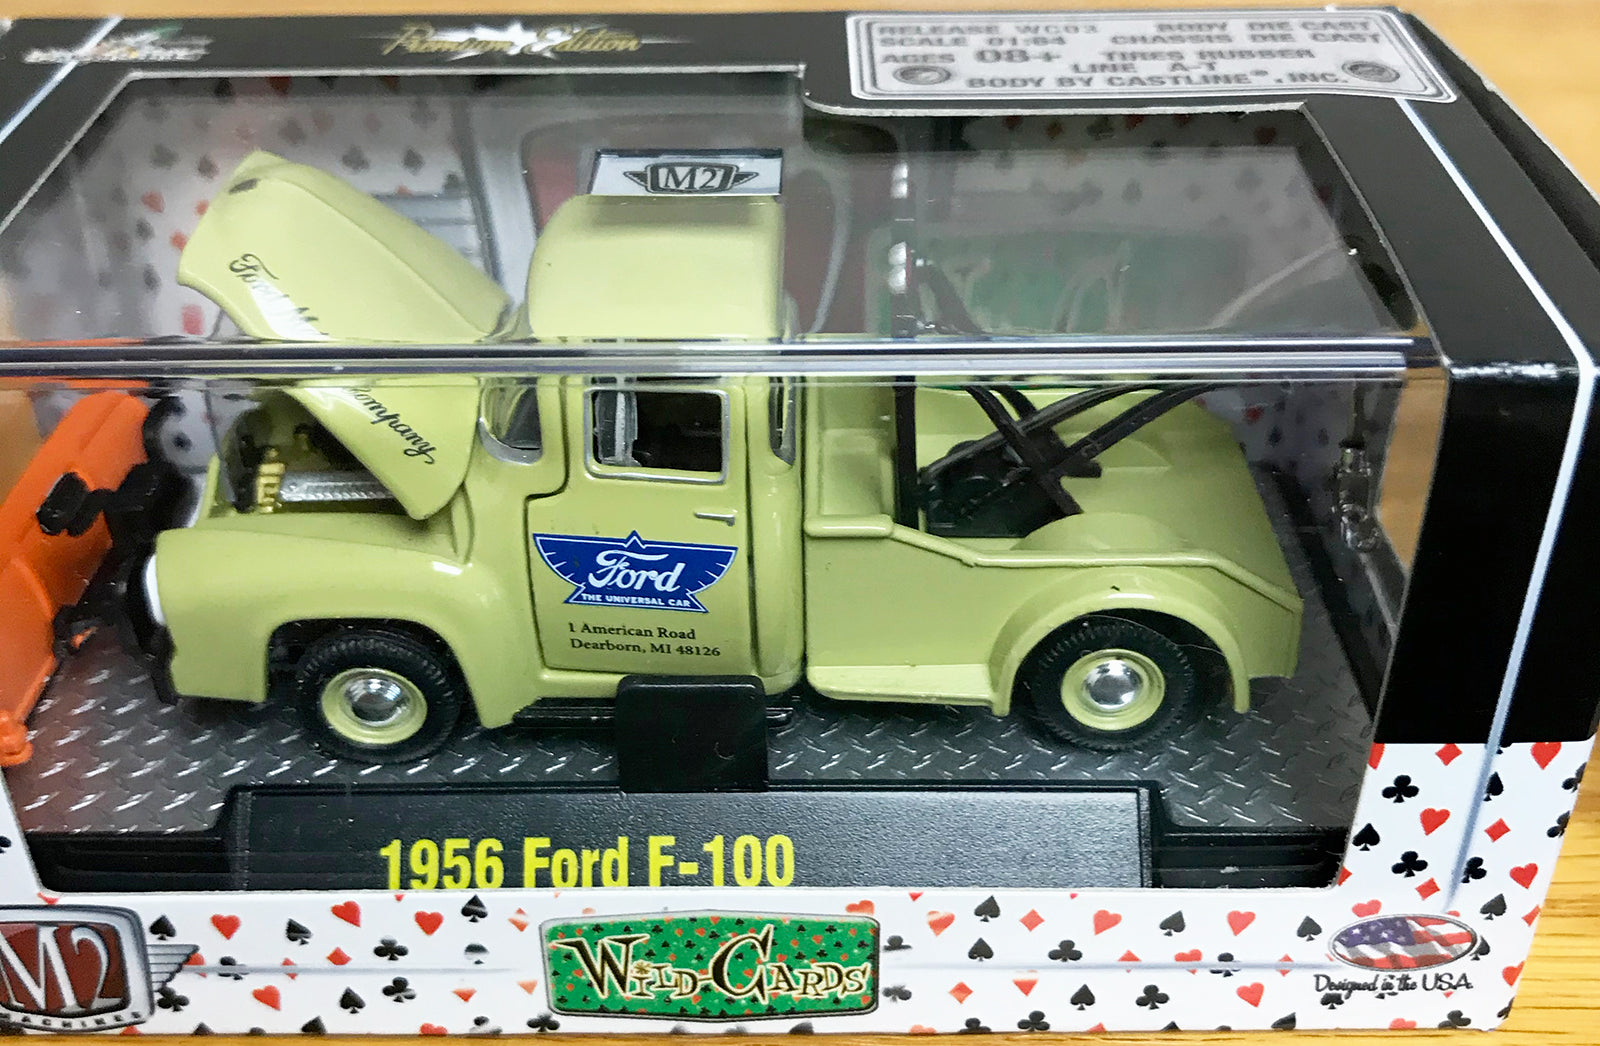 S 1956 Ford F-100 Tow Truck - Beige